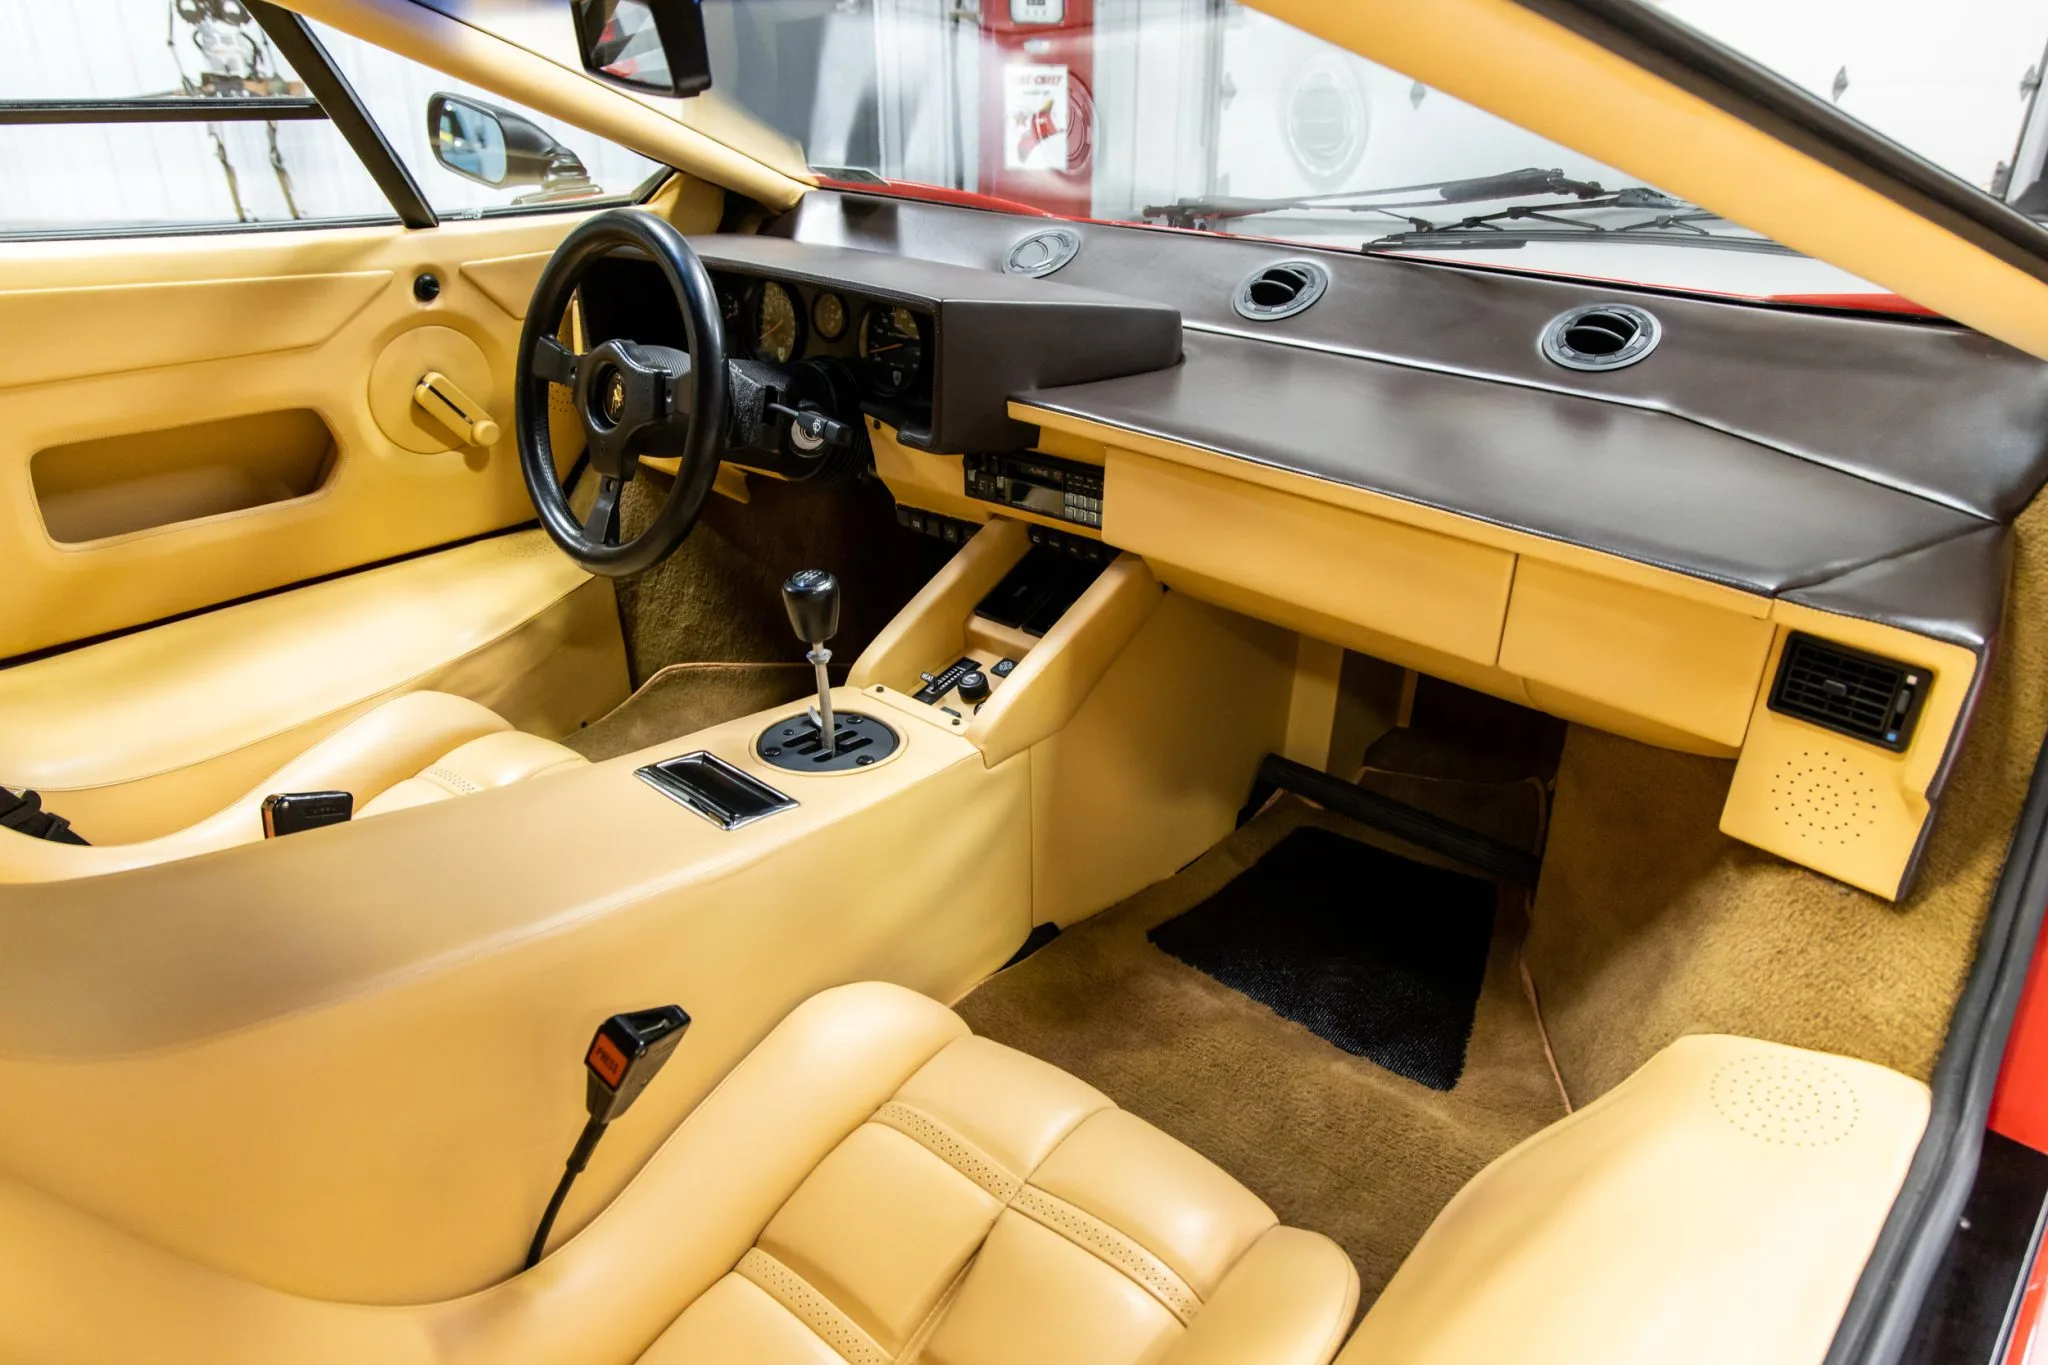 Rare Lamborghini Countach Hits The Auction Block With Just 7,000km On The Dash